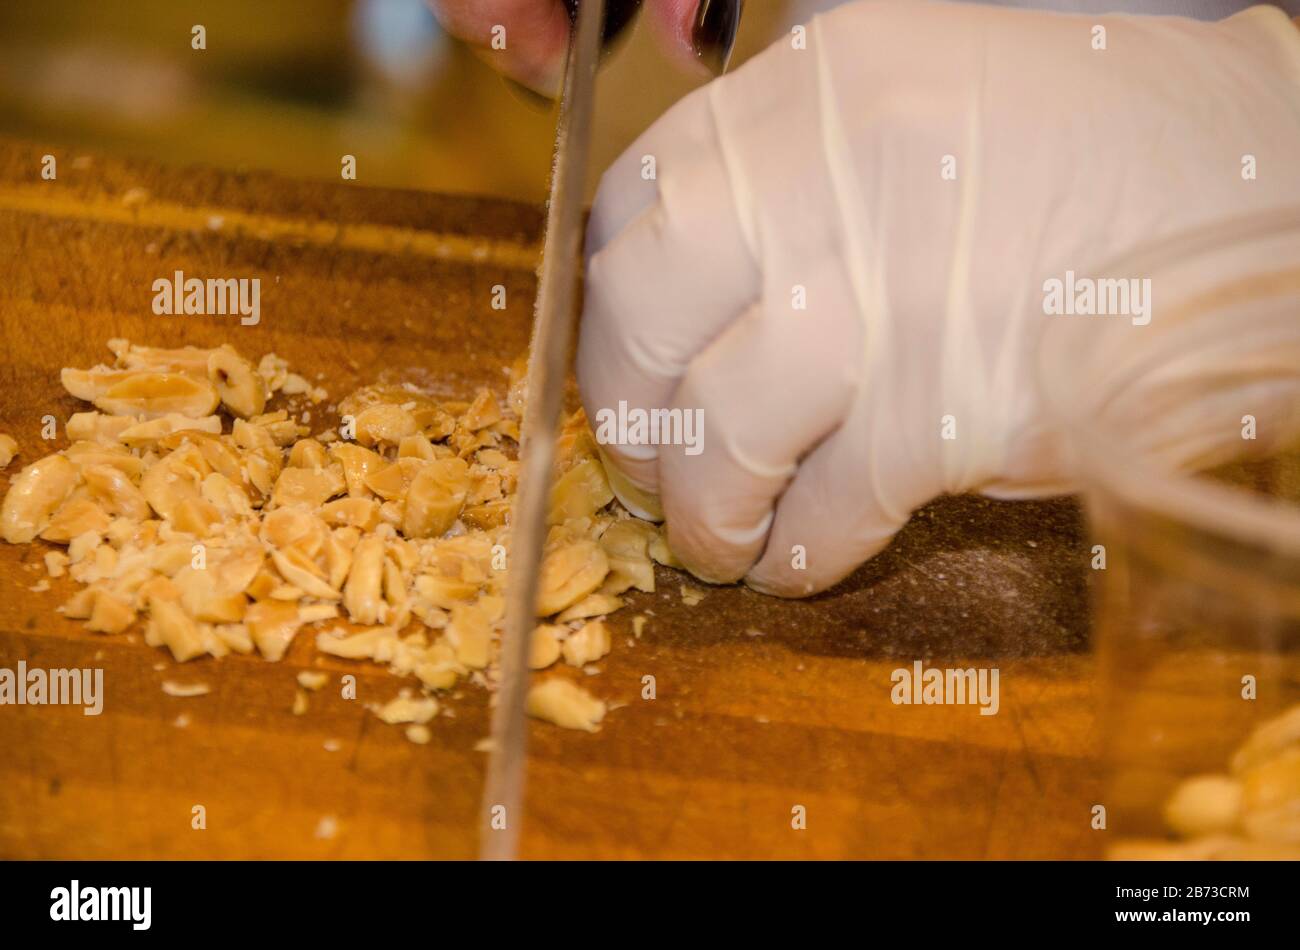 A chef is demonstrating the cutting of cheese at a baking workshop Stock Photo